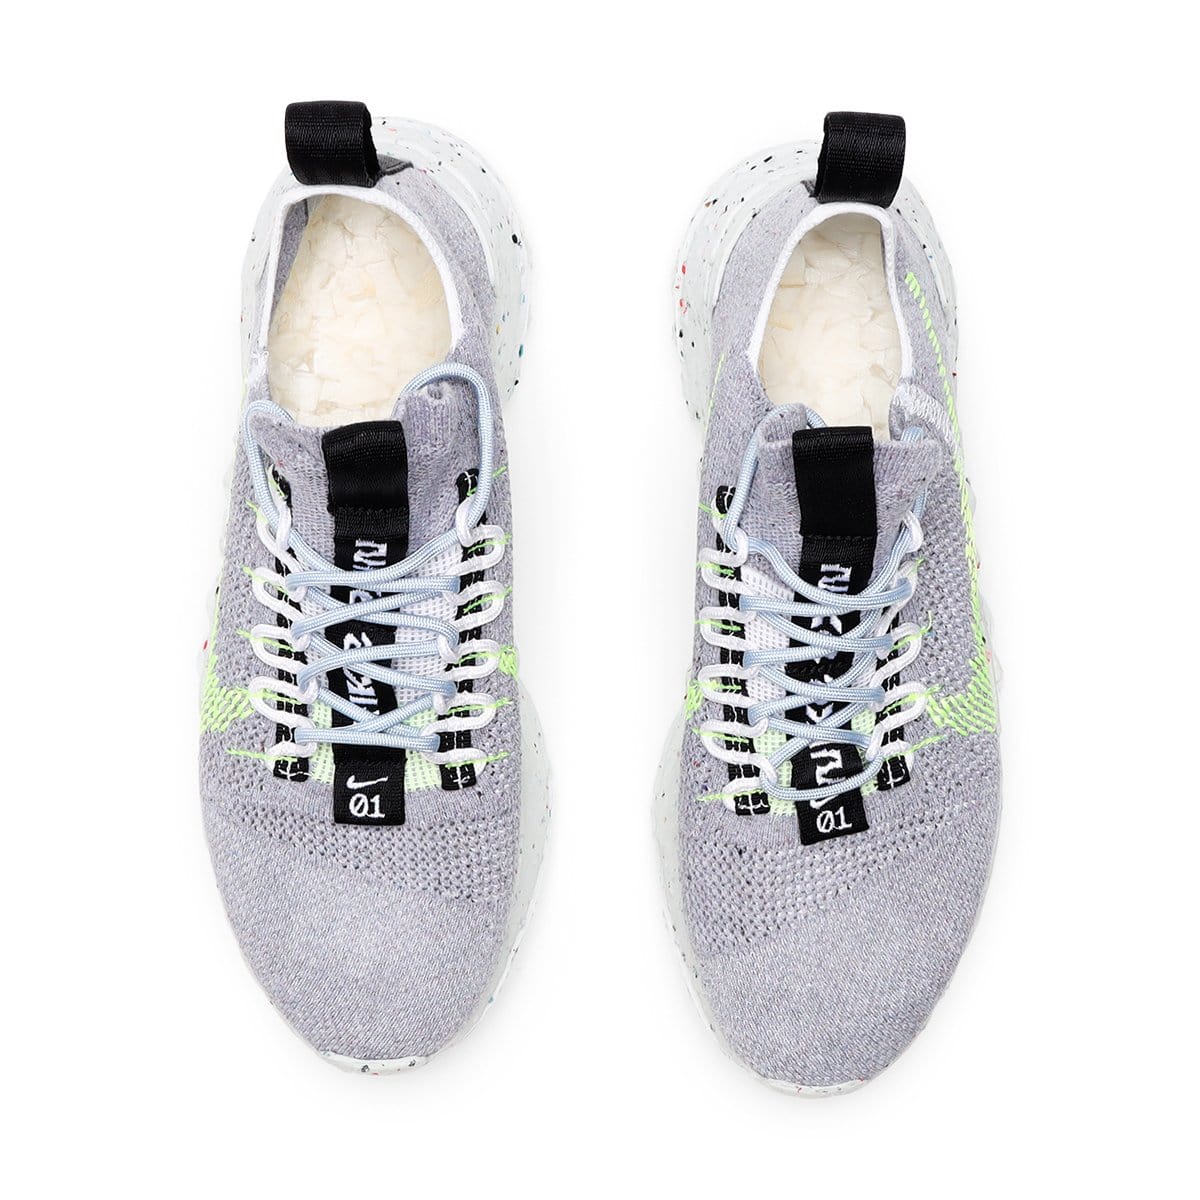 Nike Shoes SPACE HIPPIE 01